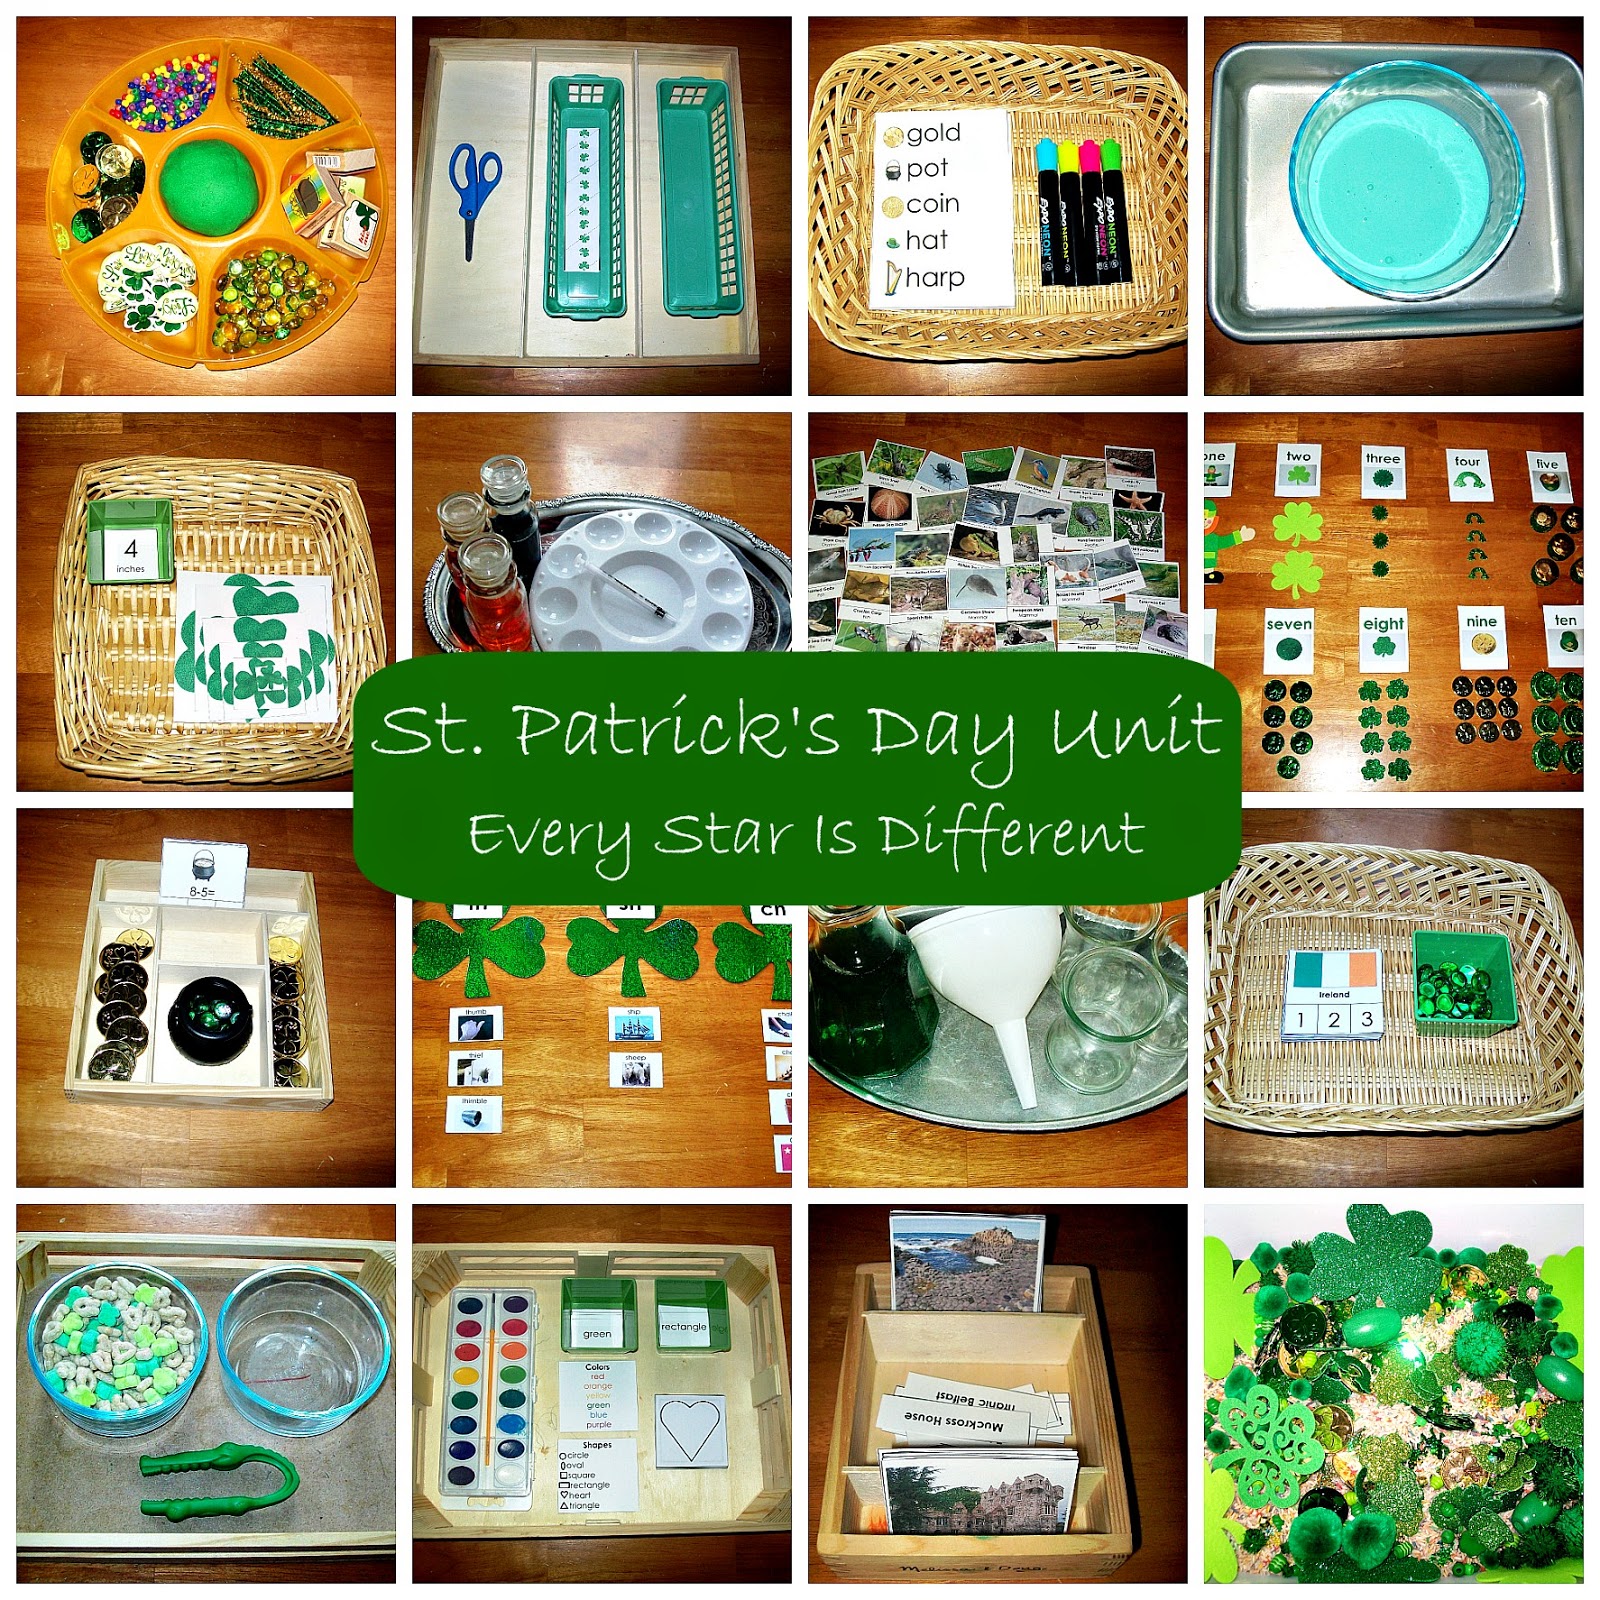 St. Patrick's Day & More